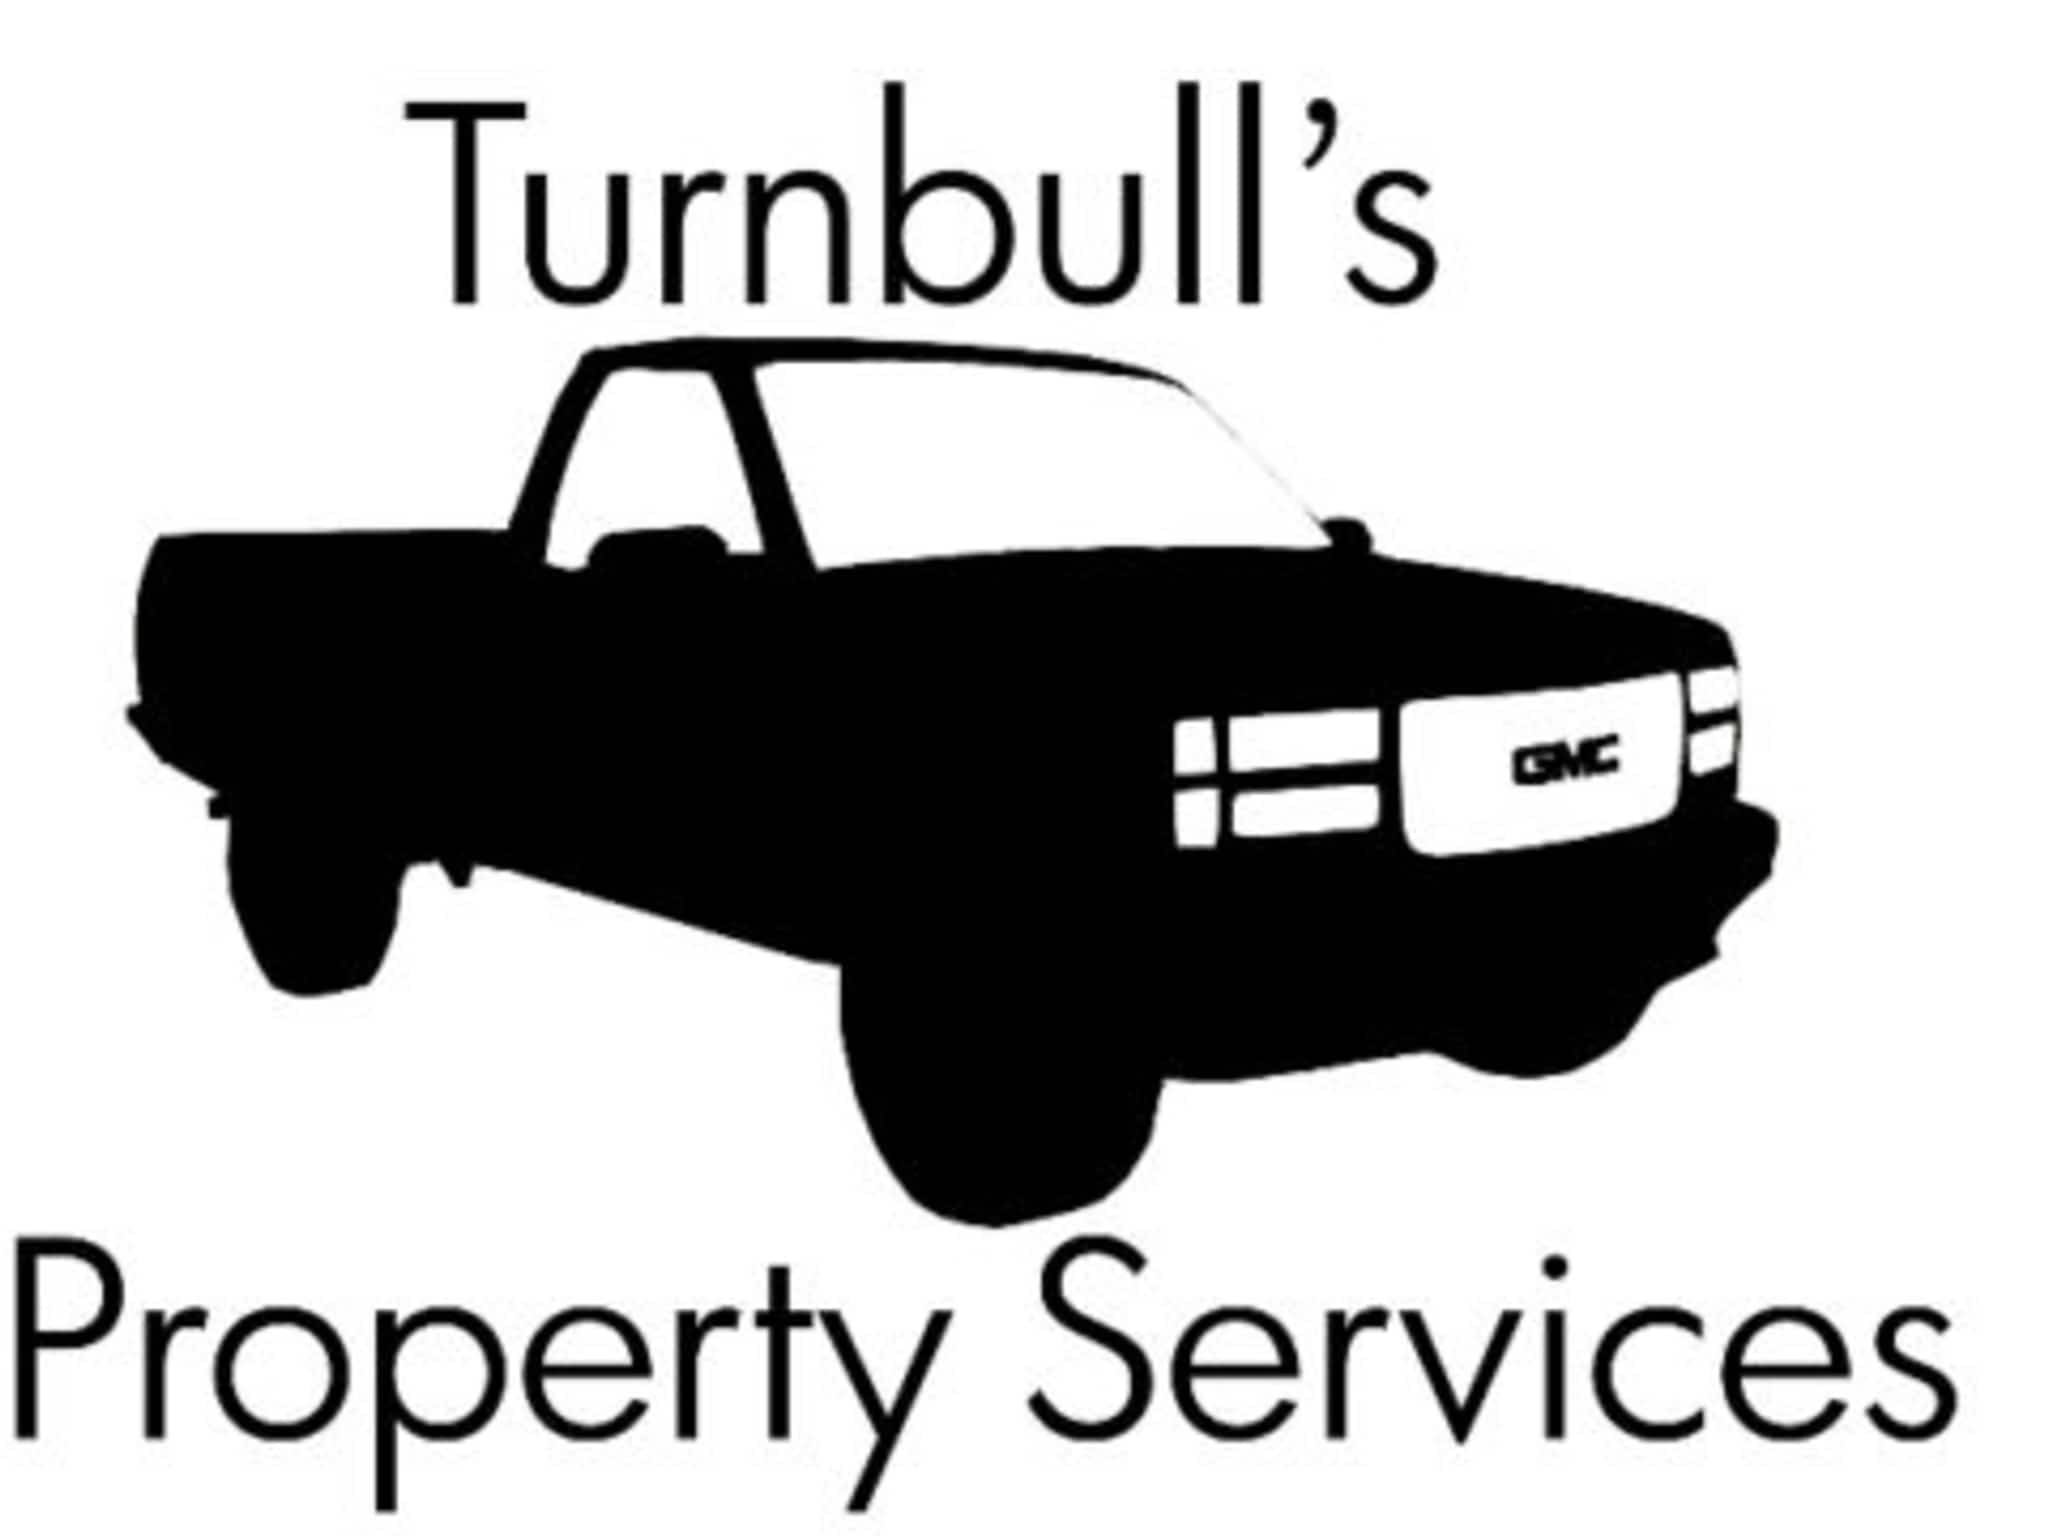 photo Turnbull's Property Services